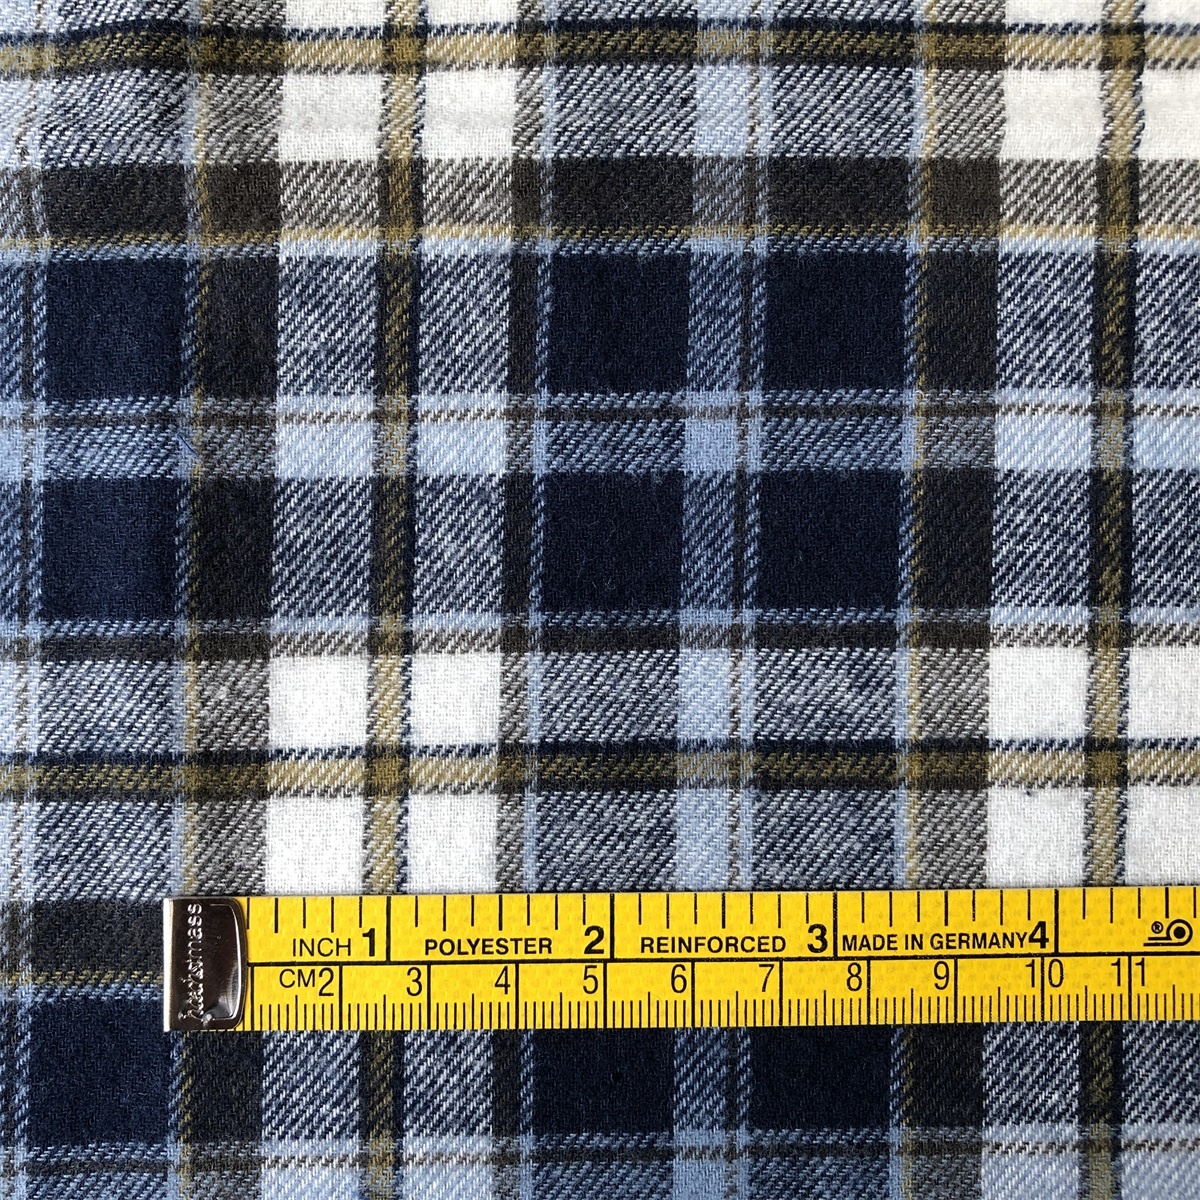 Cotton Flannel Fabric for men's casual shirts by compact yarn 100% cotton yarn dyed twill plaid brushed shirts woven fabric